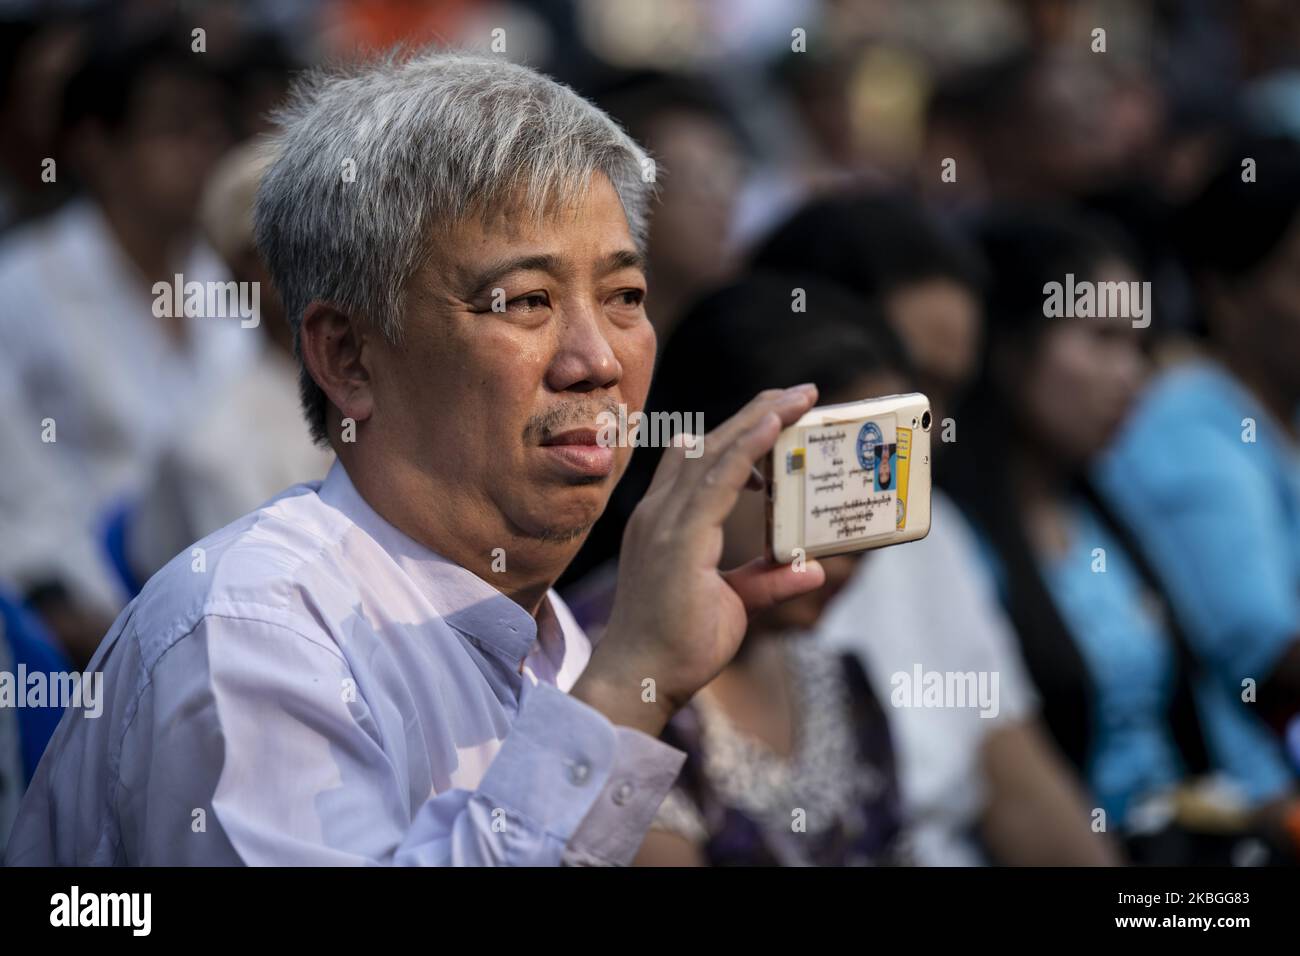 A man records a video with his mobile phone during a public meeting in Yangon on February 8, 2020. (Photo by Shwe Paw Mya Tin/NurPhoto) Stock Photo